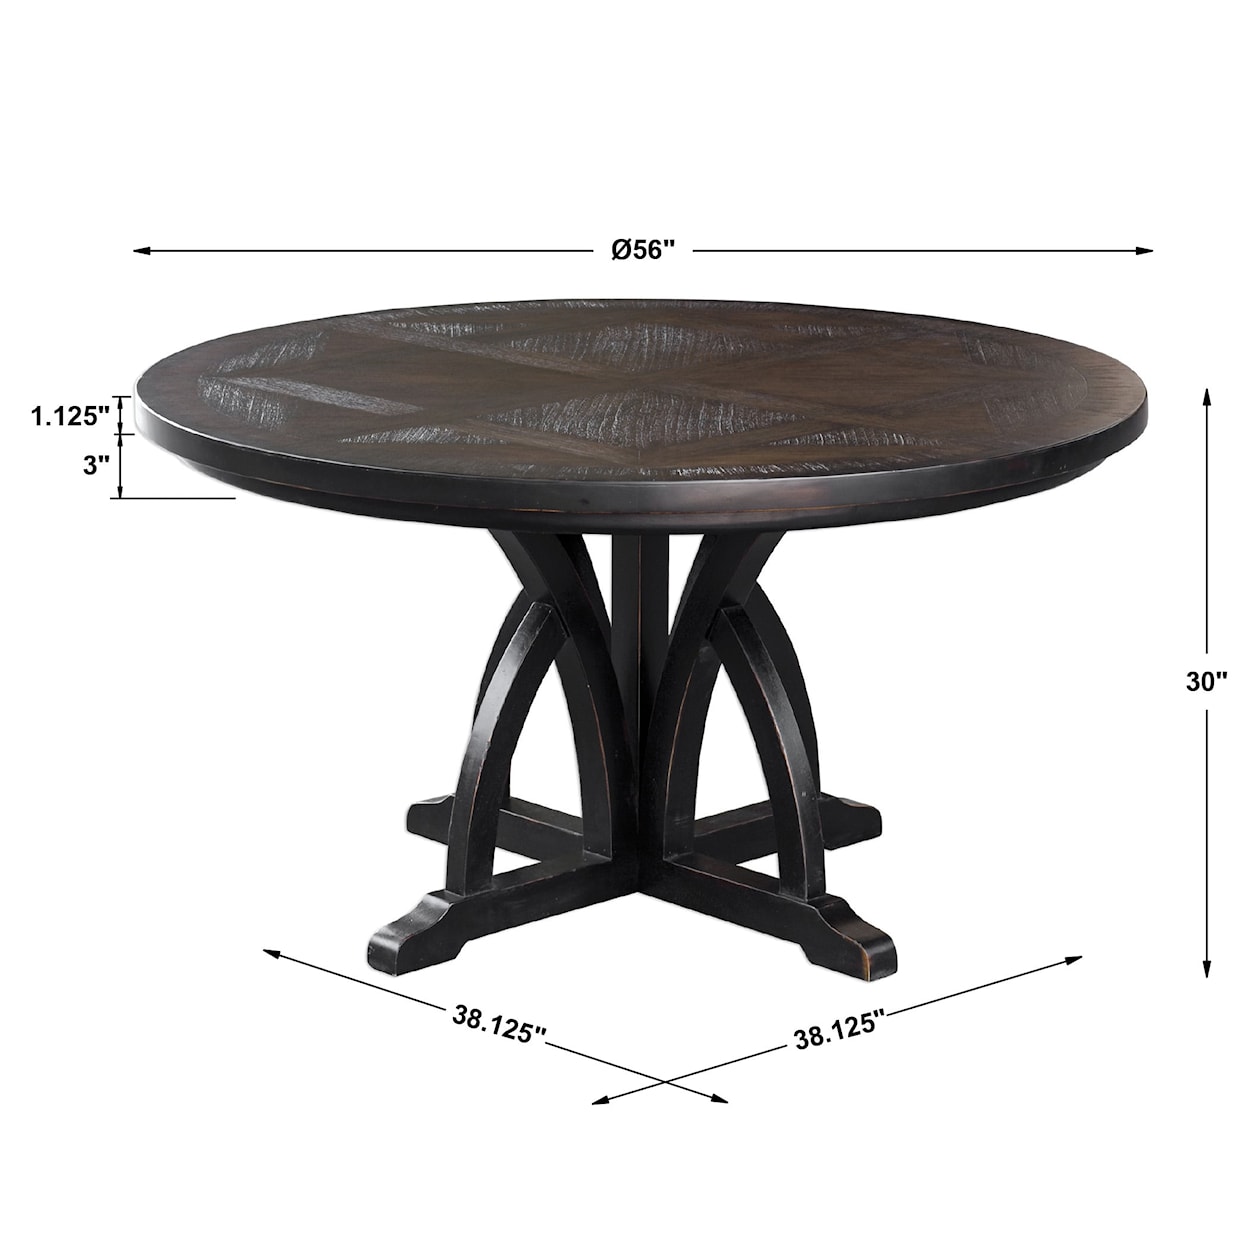 Uttermost Accent Furniture Maiva Round Black Dining Table